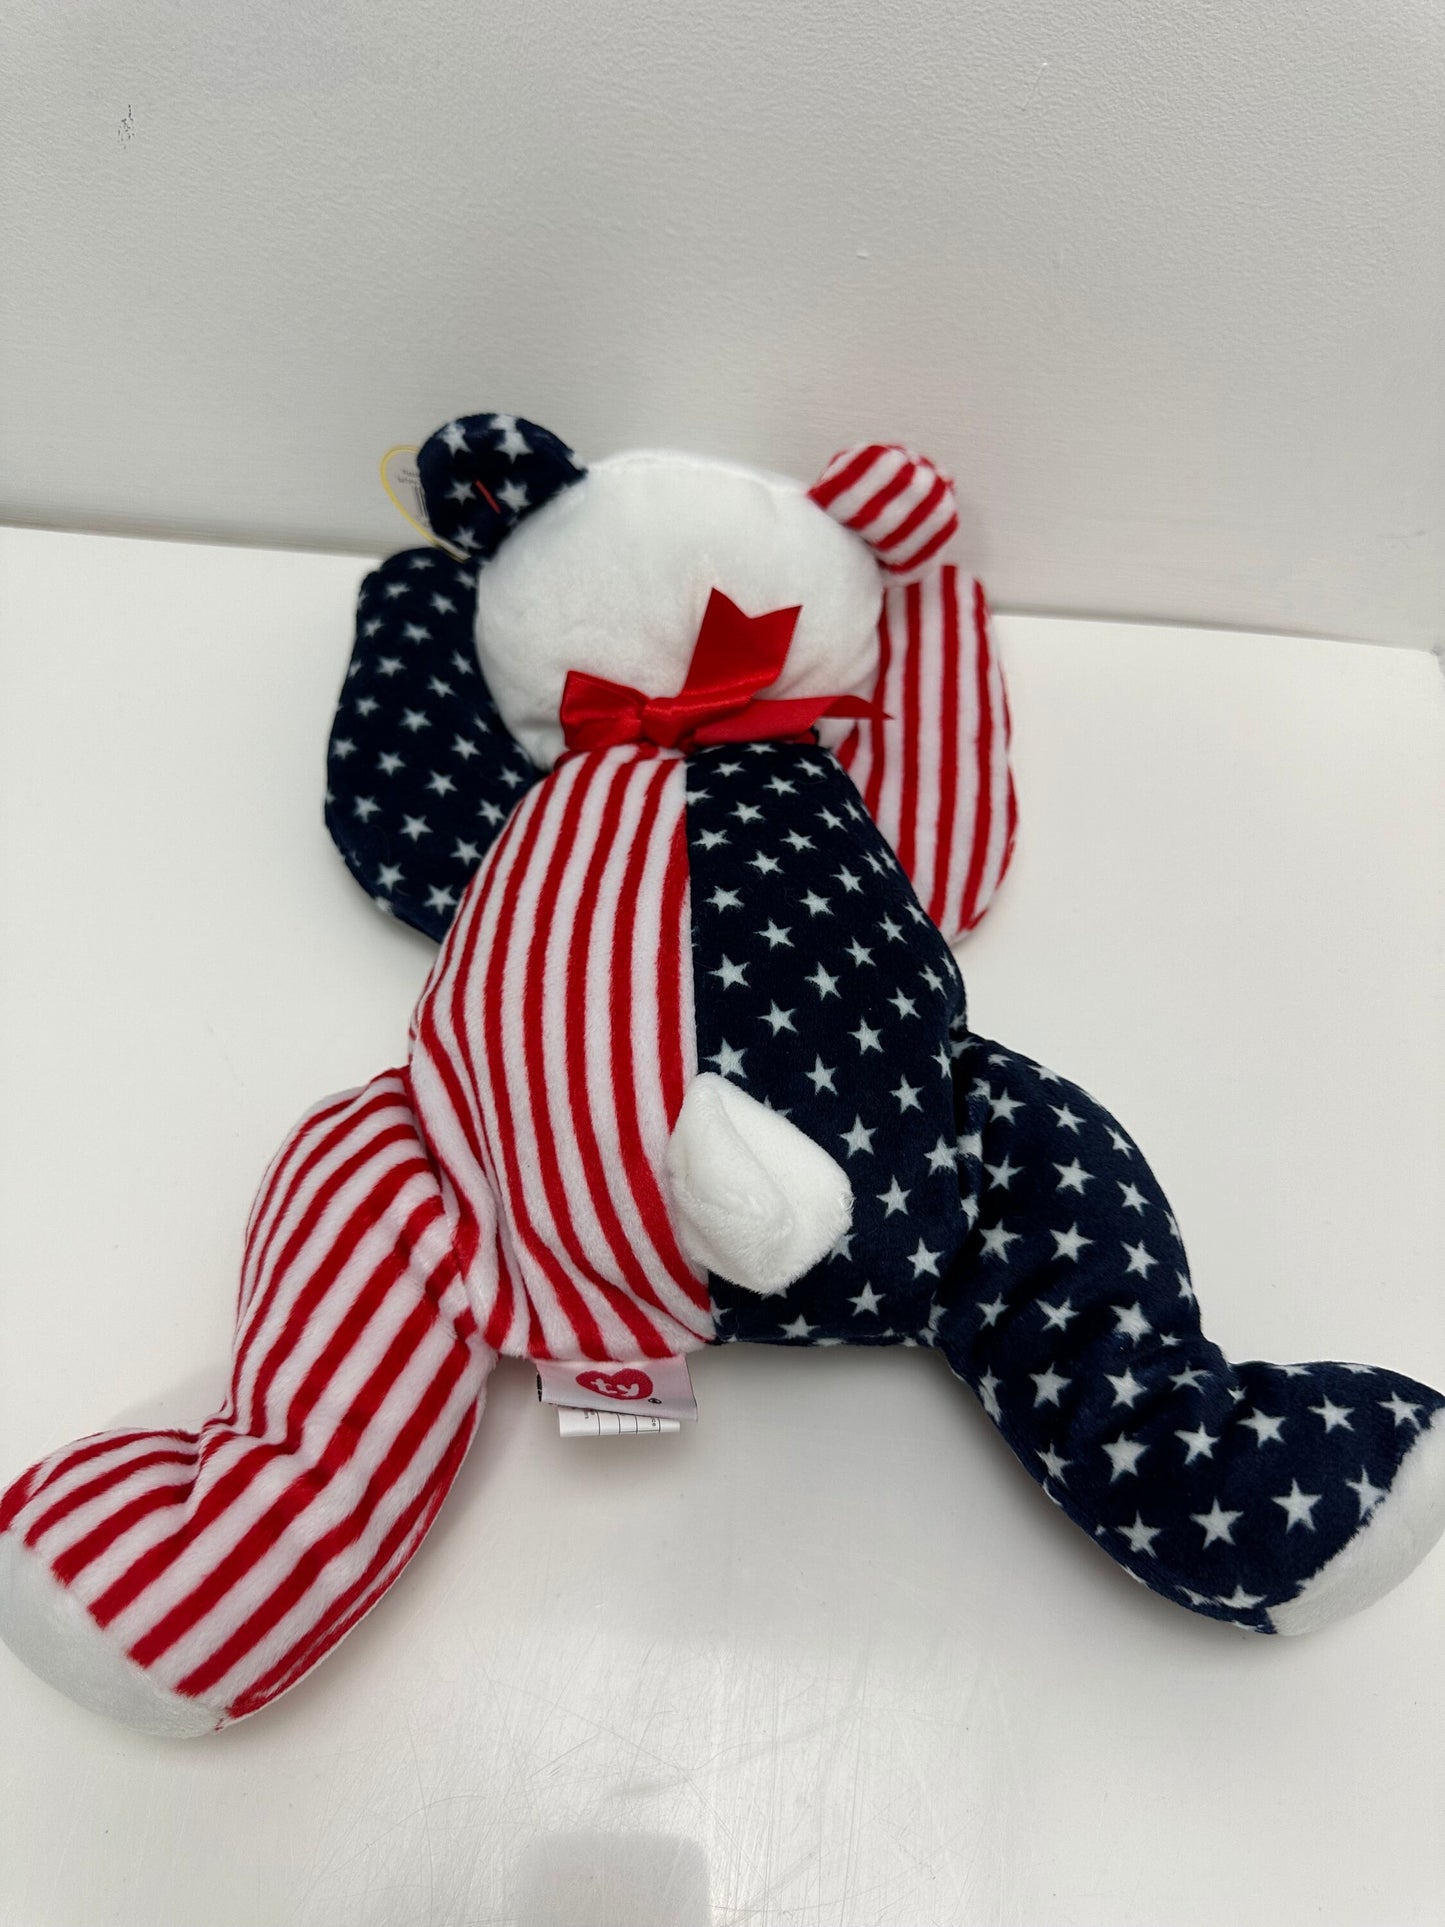 Ty Pillow Pal “Sparkler” the American Bear! (12 inch)